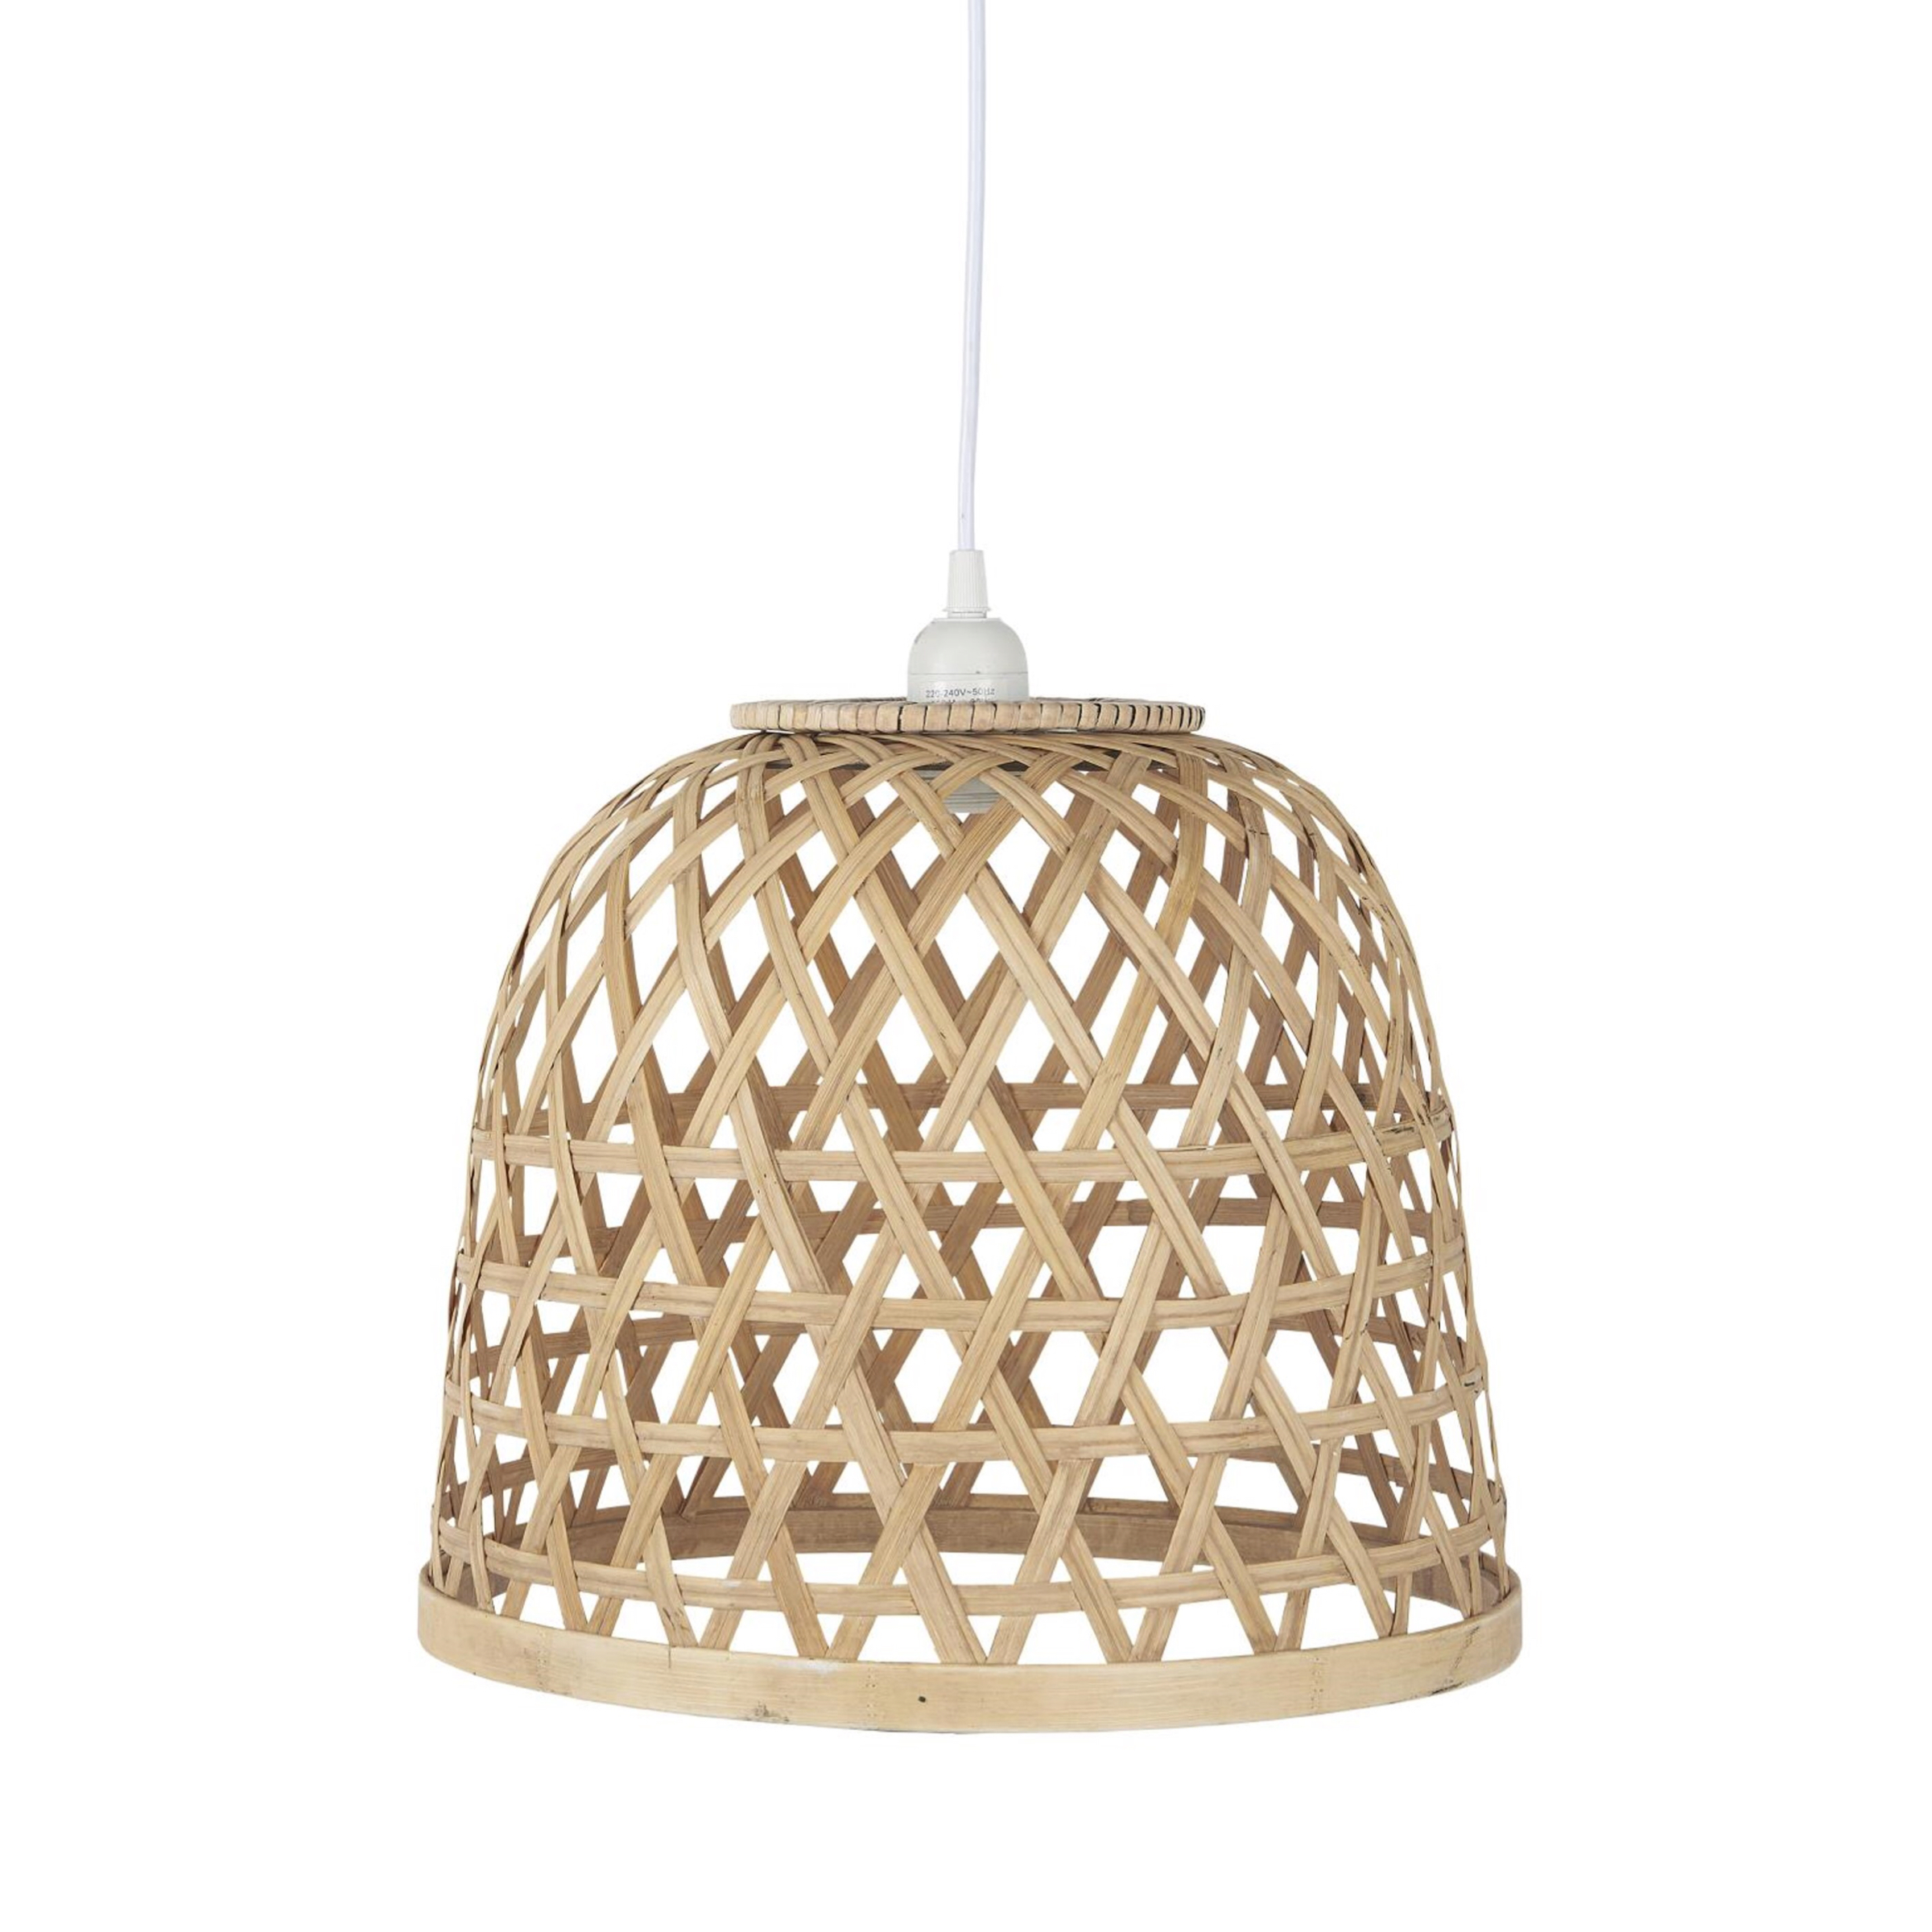 Ib Laursen Small Hanging Bamboo Shade Lamp with White Plastic Cord